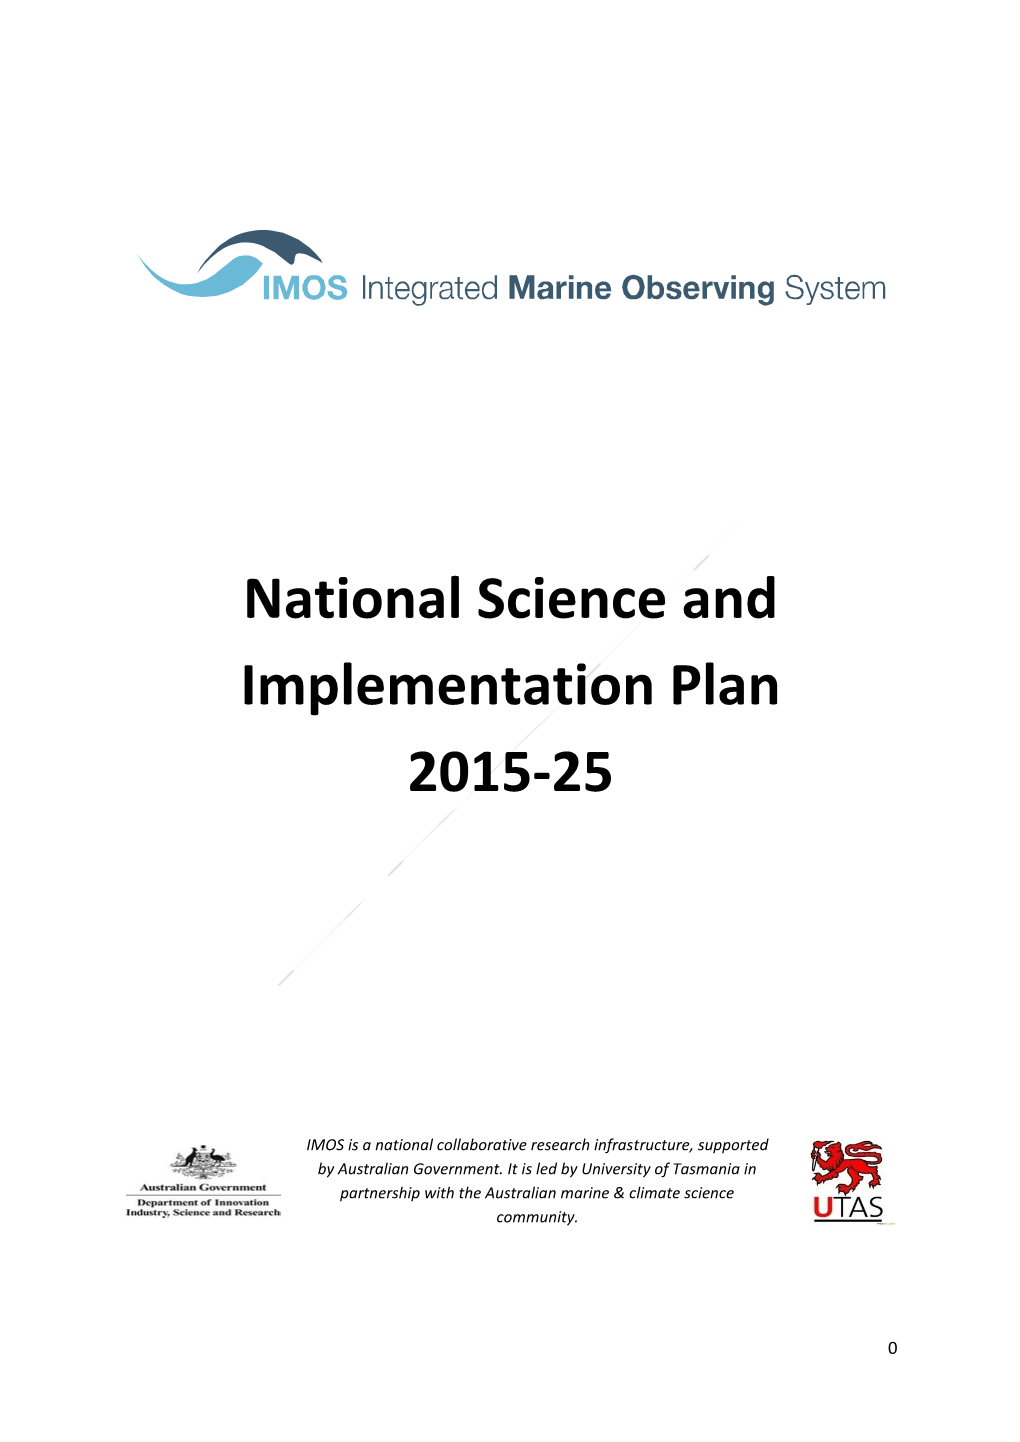 National Science and Implementation Plan 2015-25